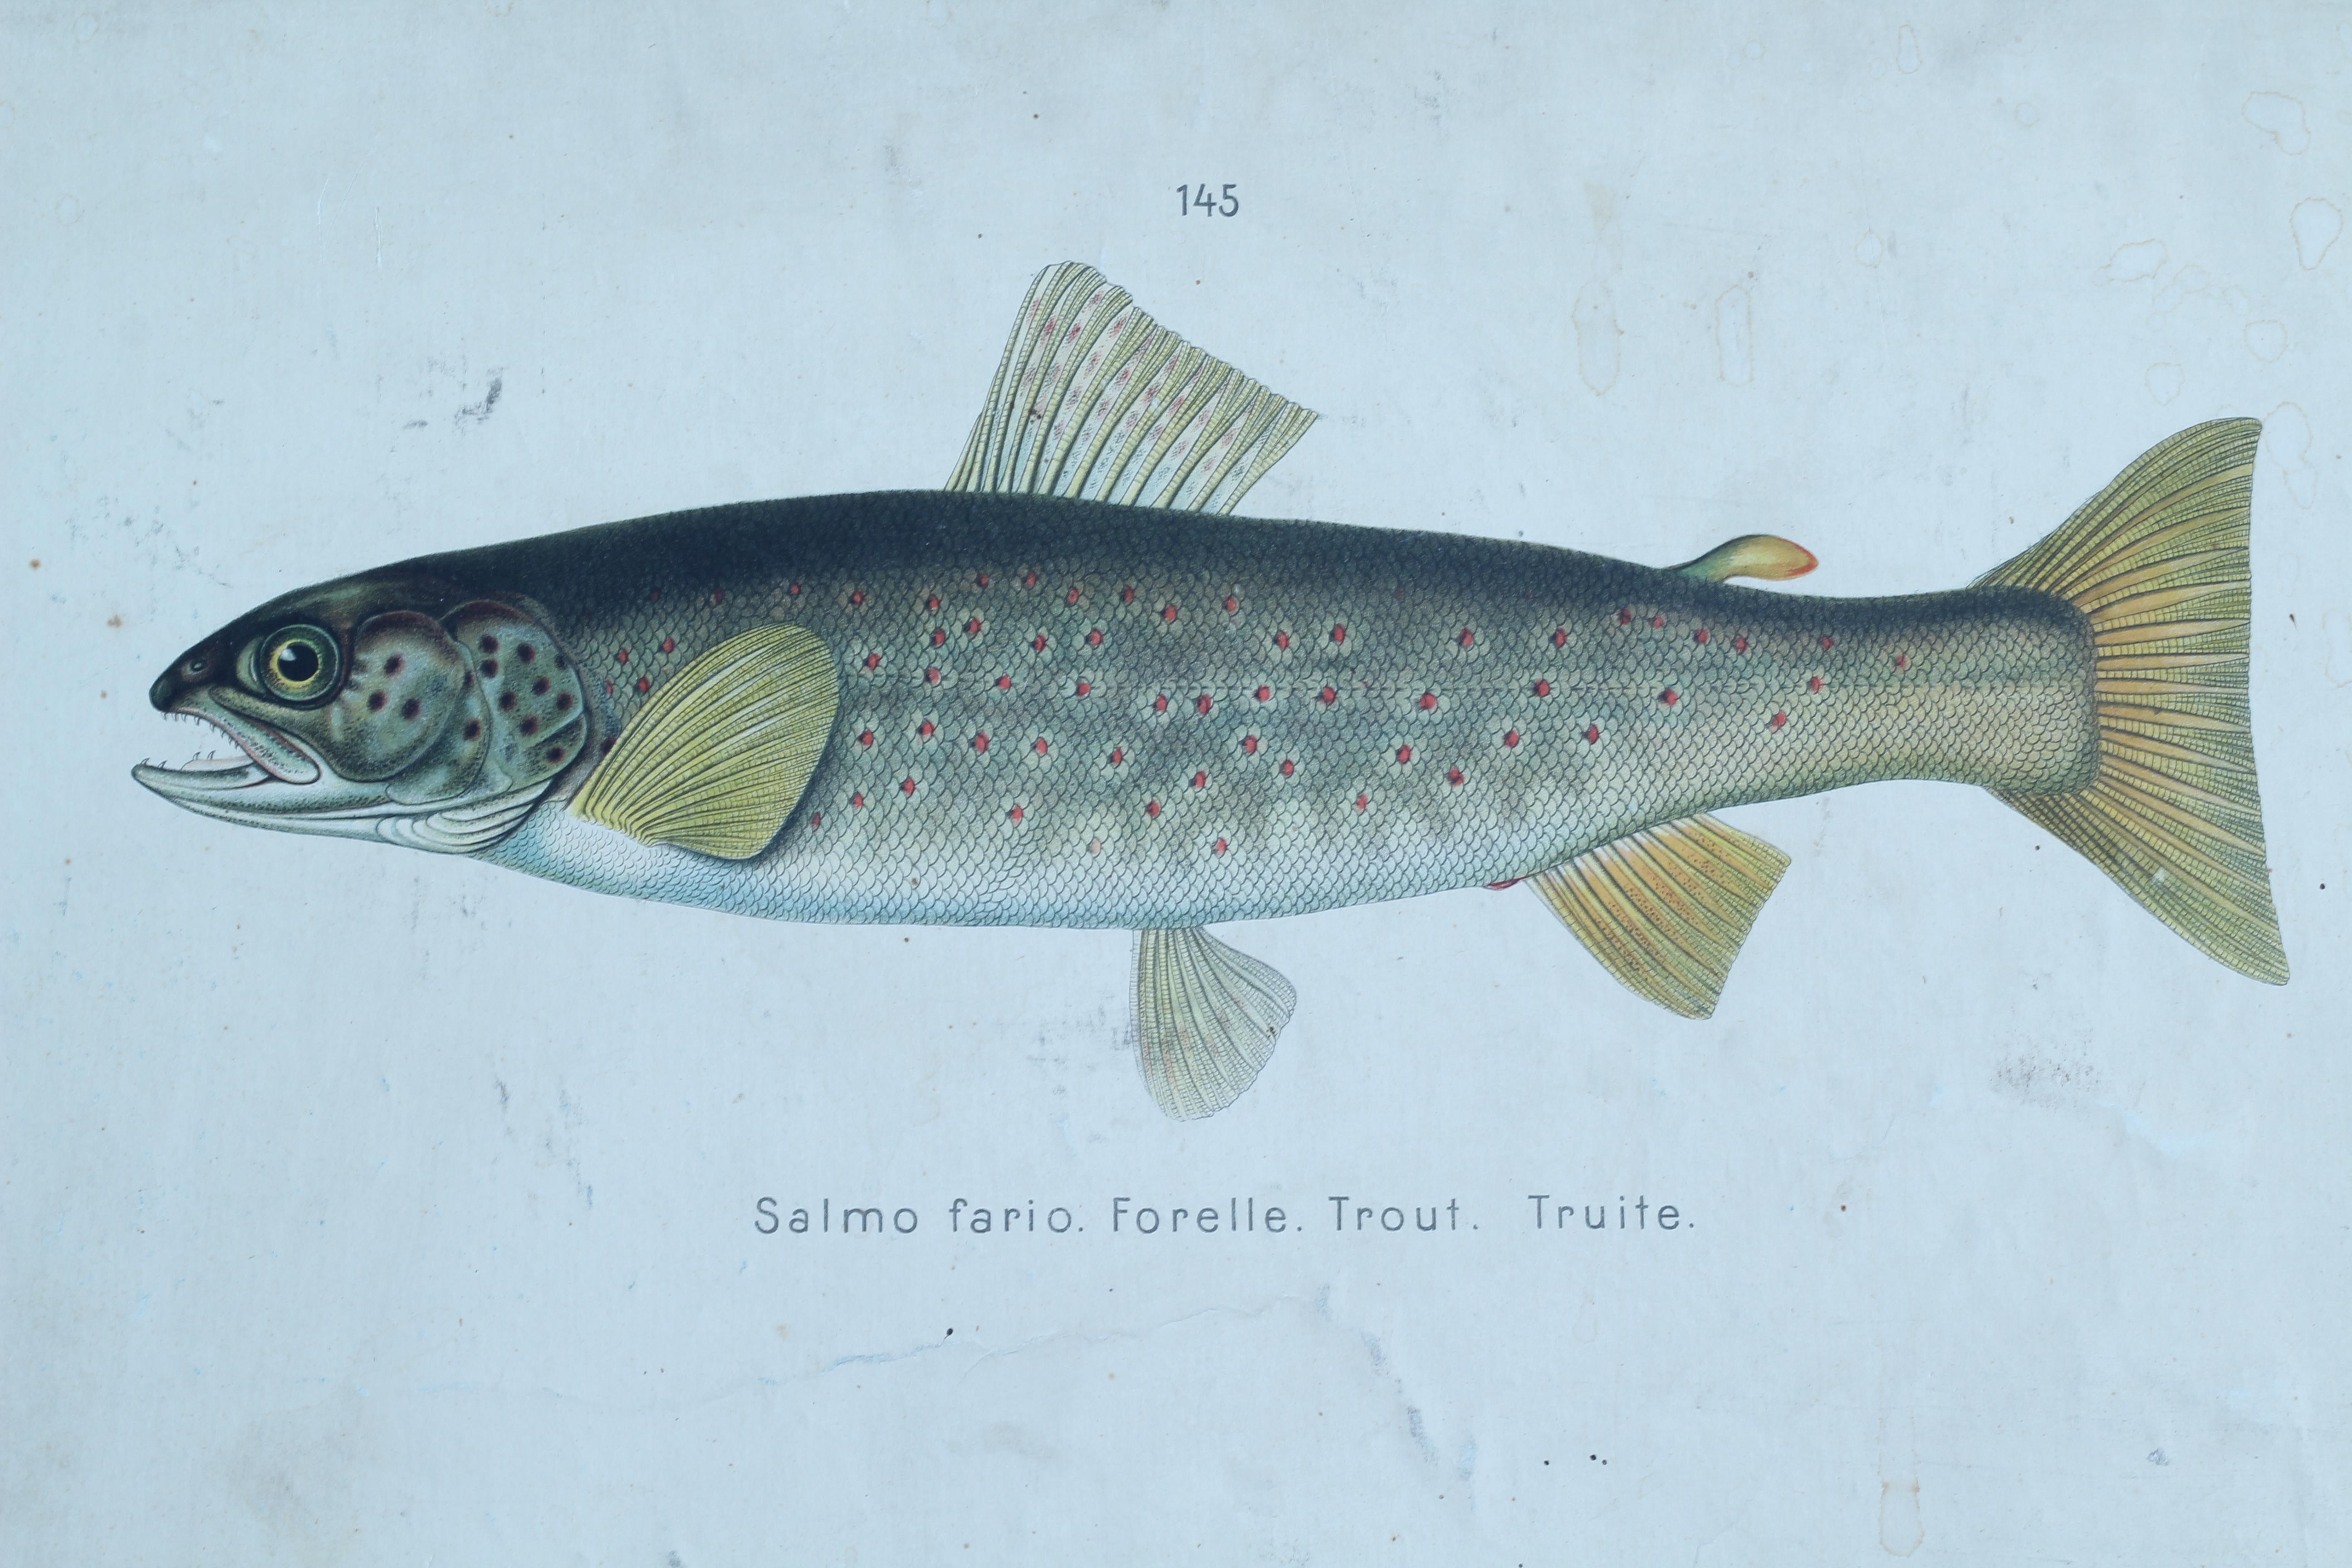 Old school chart with a beautiful detailed fish drawing. The chart presents very precise images of different fish species. It is made of a rigid cardboard. Perfect decor piece for a restaurant or stylish kitchen.